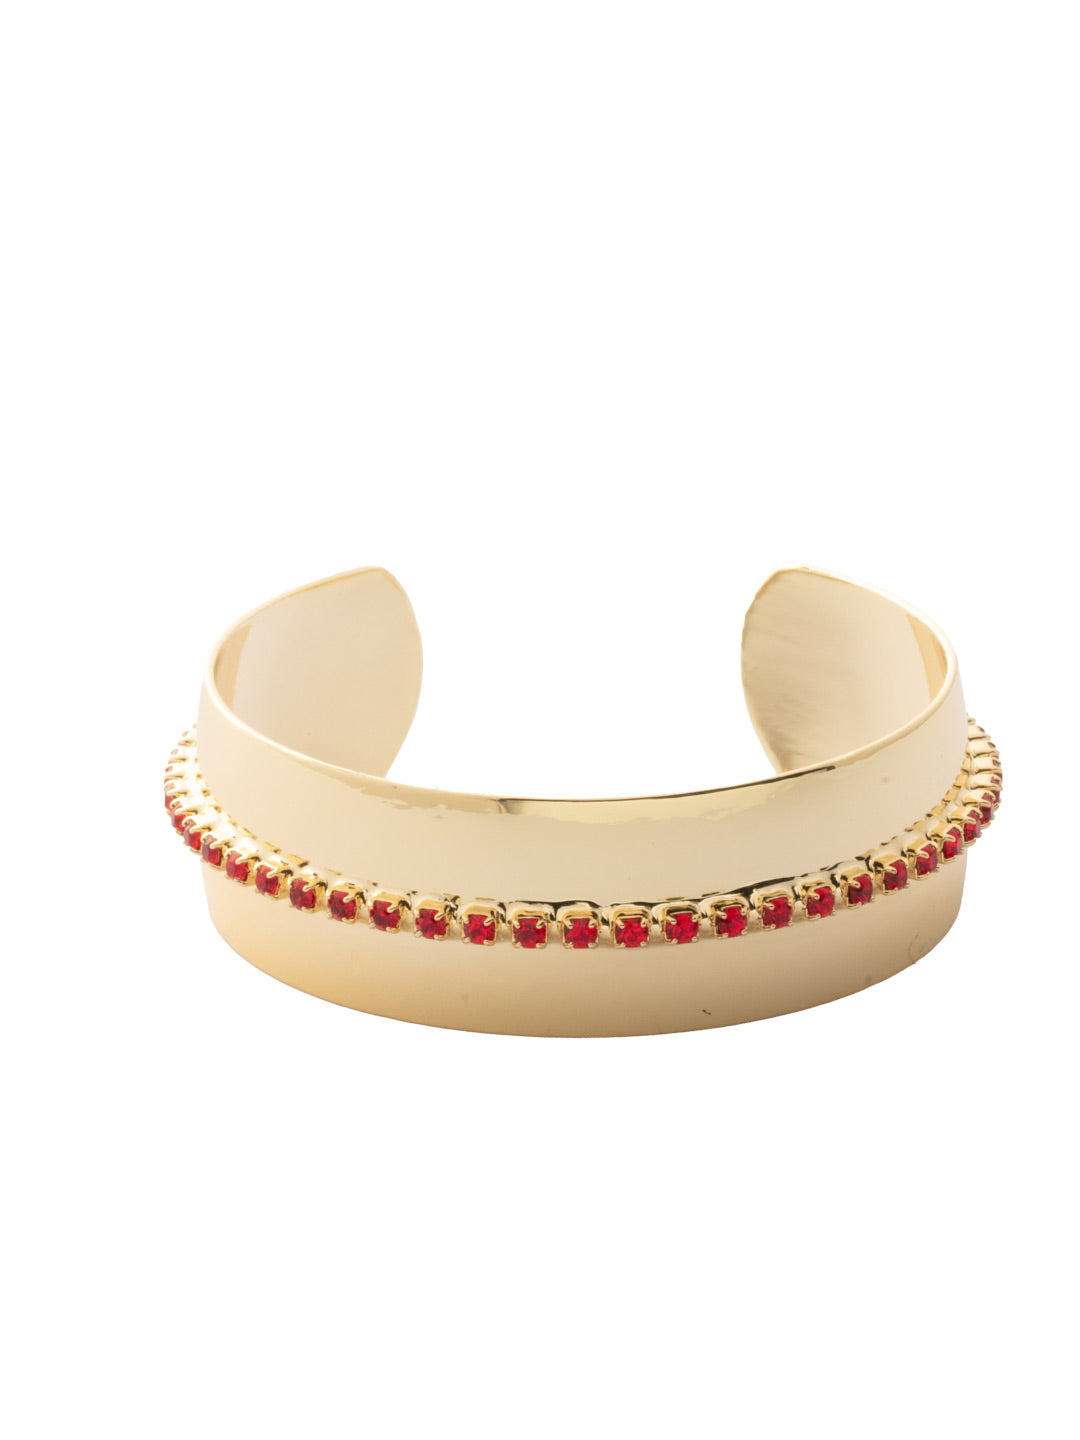 Embellished Cuff Bracelet - BFK3BGFIS - <p>The Embellished Cuff Bracelet features a domed band cuff embellished with a line of clear crystals. From Sorrelli's Fireside collection in our Bright Gold-tone finish.</p>